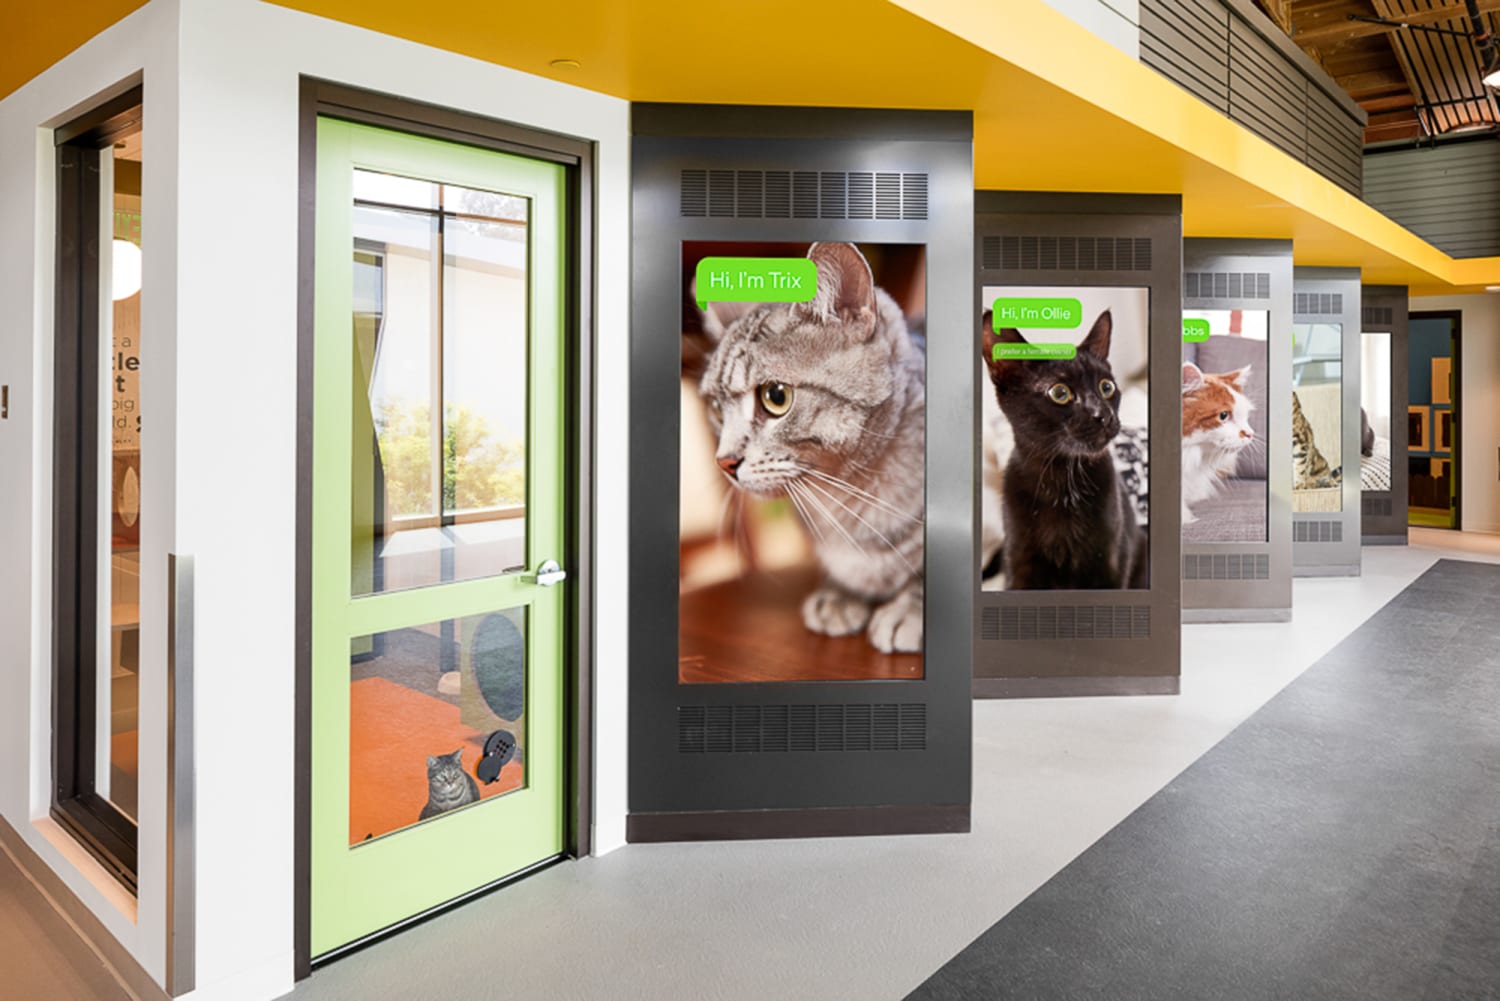 Annenberg PetCenter will make you rethink animal shelters